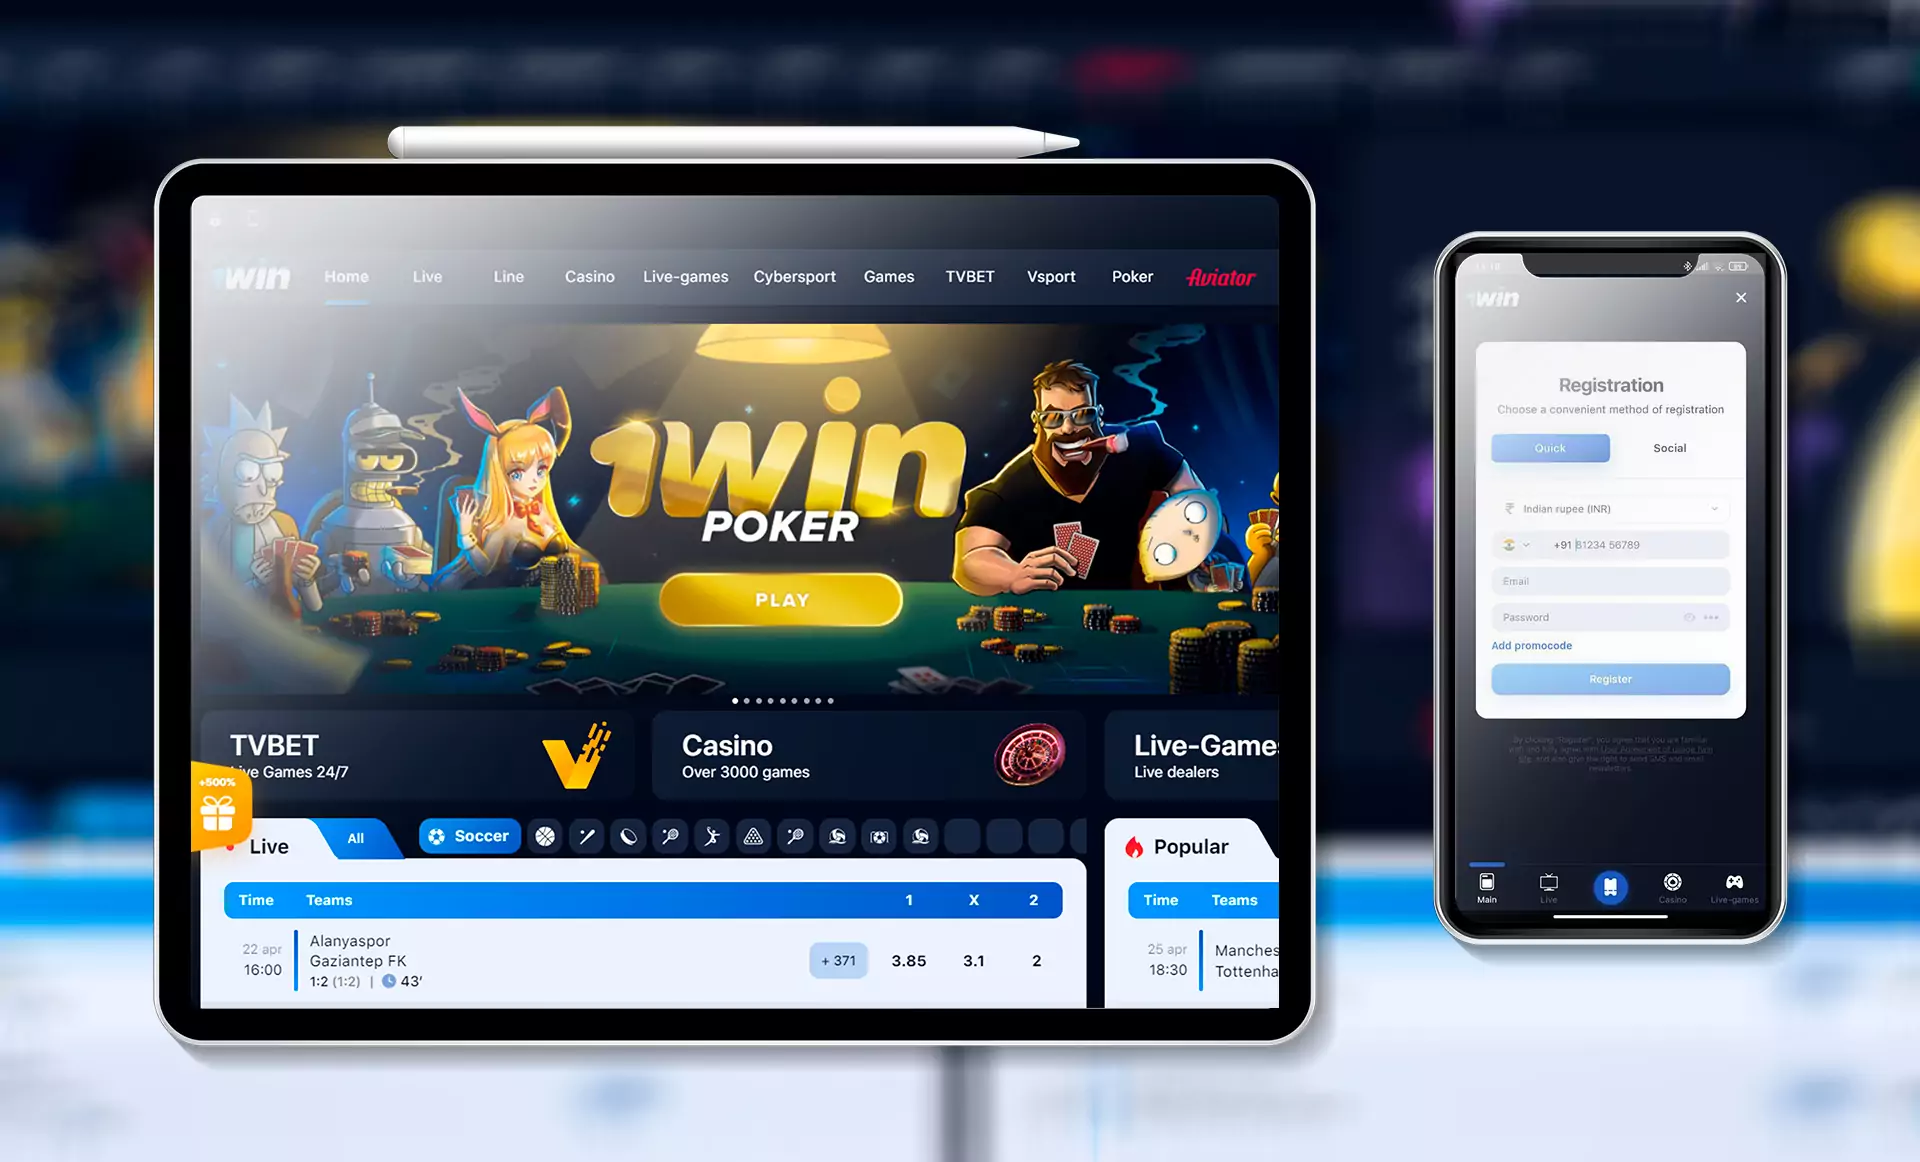 1win mobile app is the most convenient way for betting or gambling whenever you want.